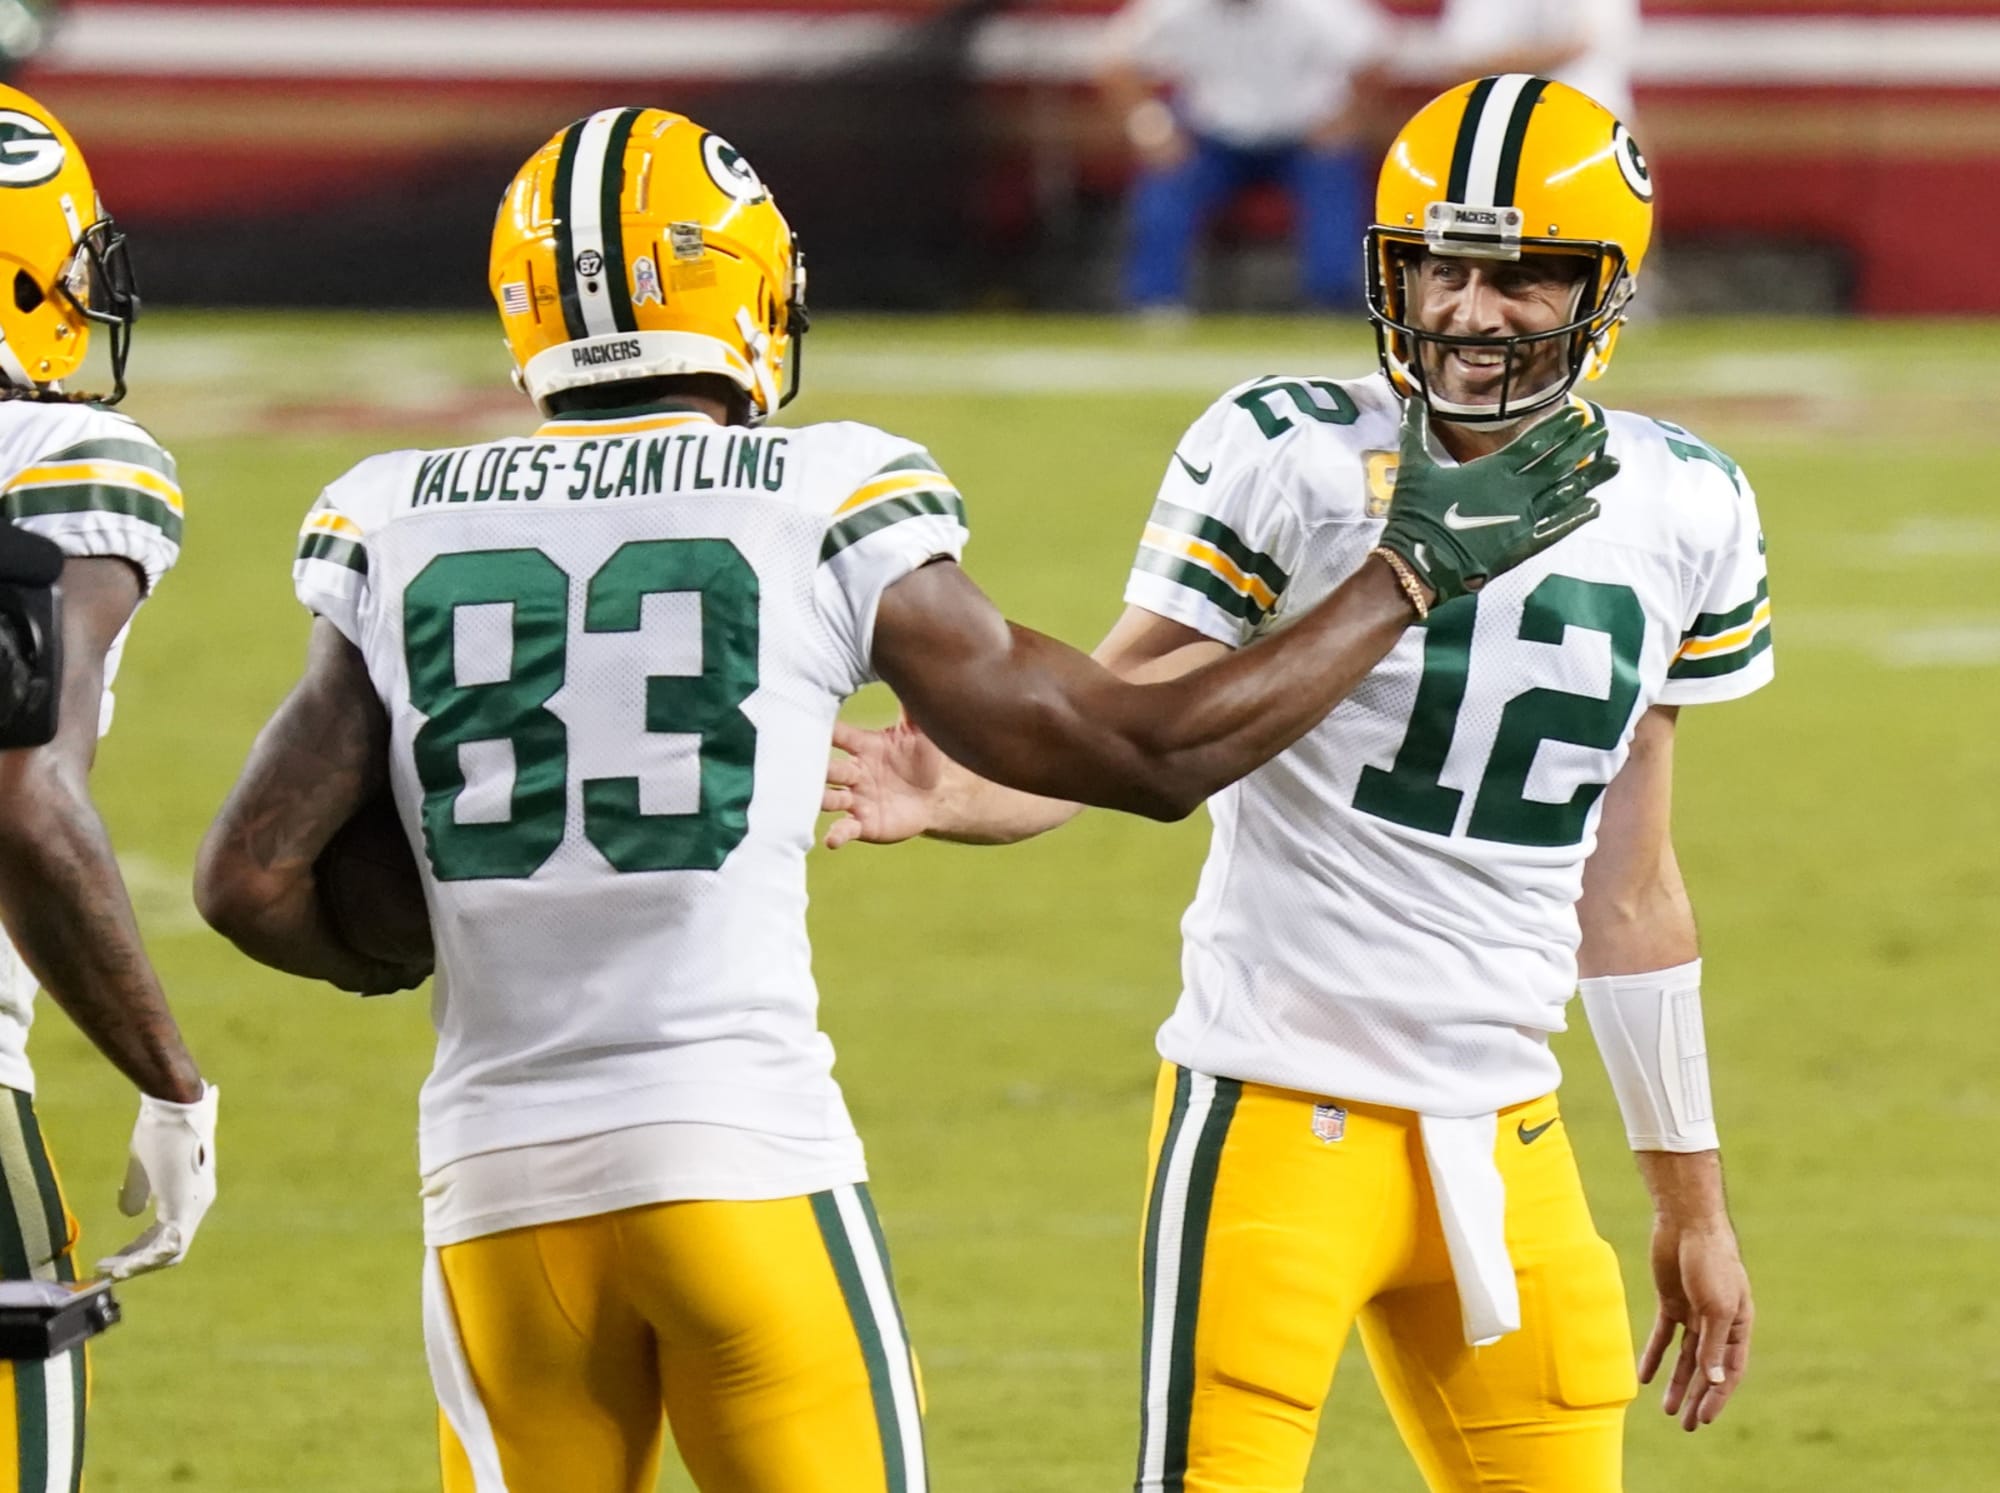 Marquez-Valdes Scantling and Aaron Rodgers high five after a big play.